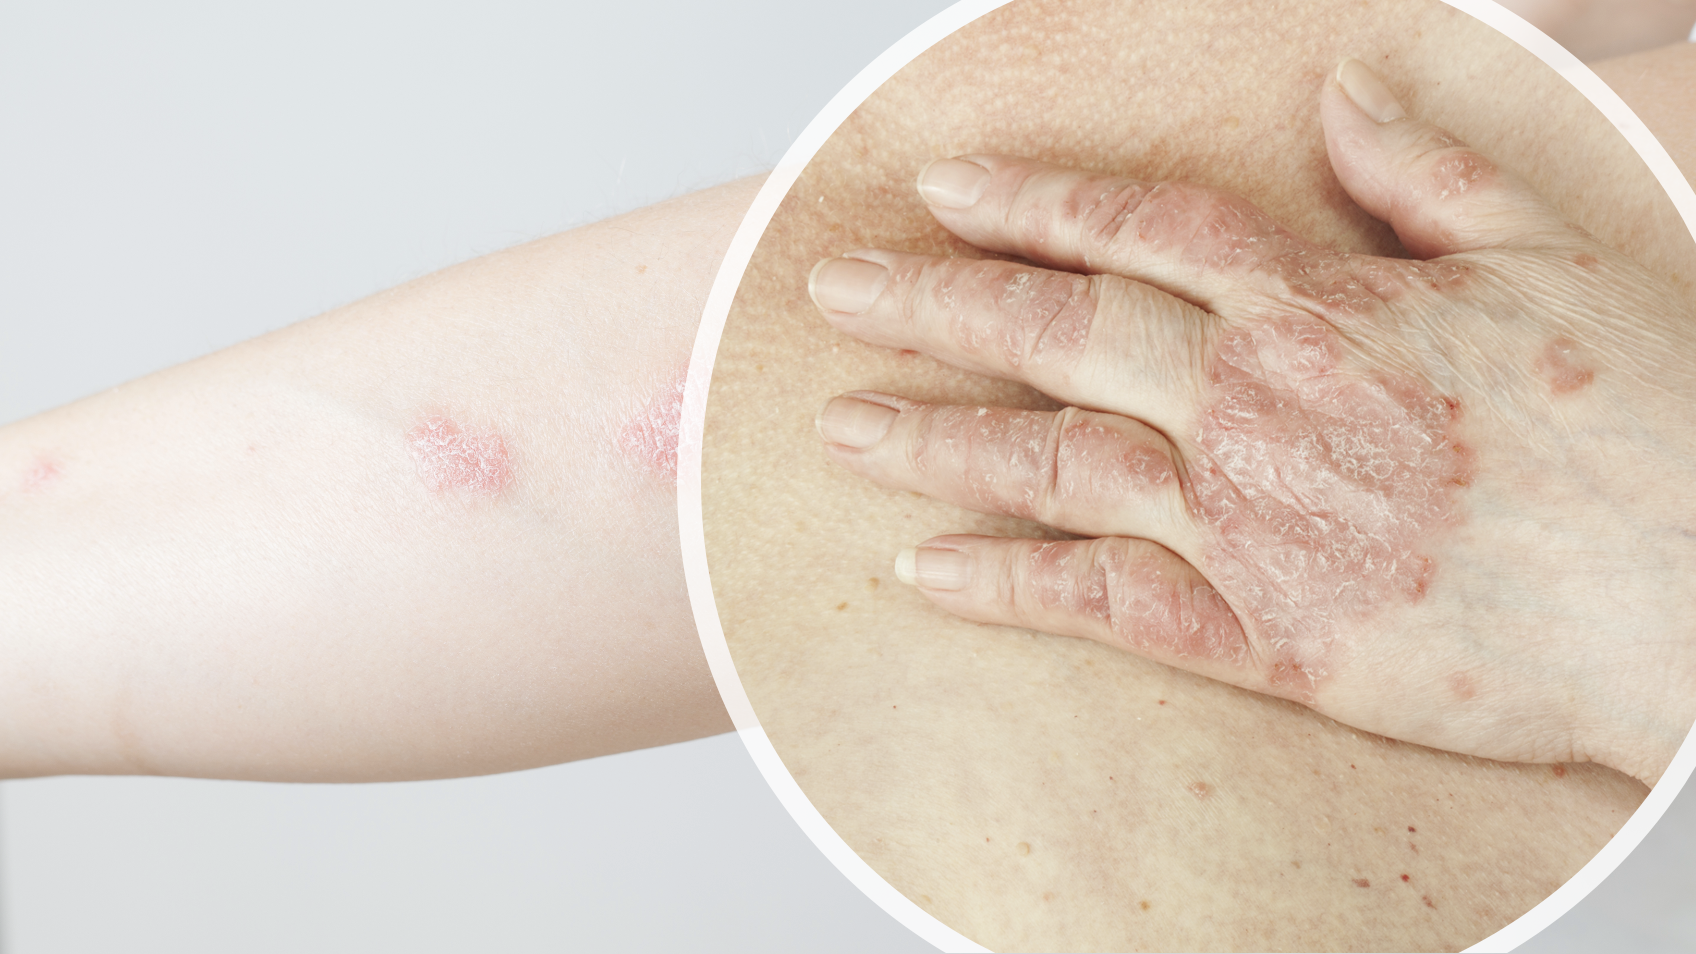 Multidomain Disease More Common, Linked to Worse Outcomes in Psoriatic Arthritis 